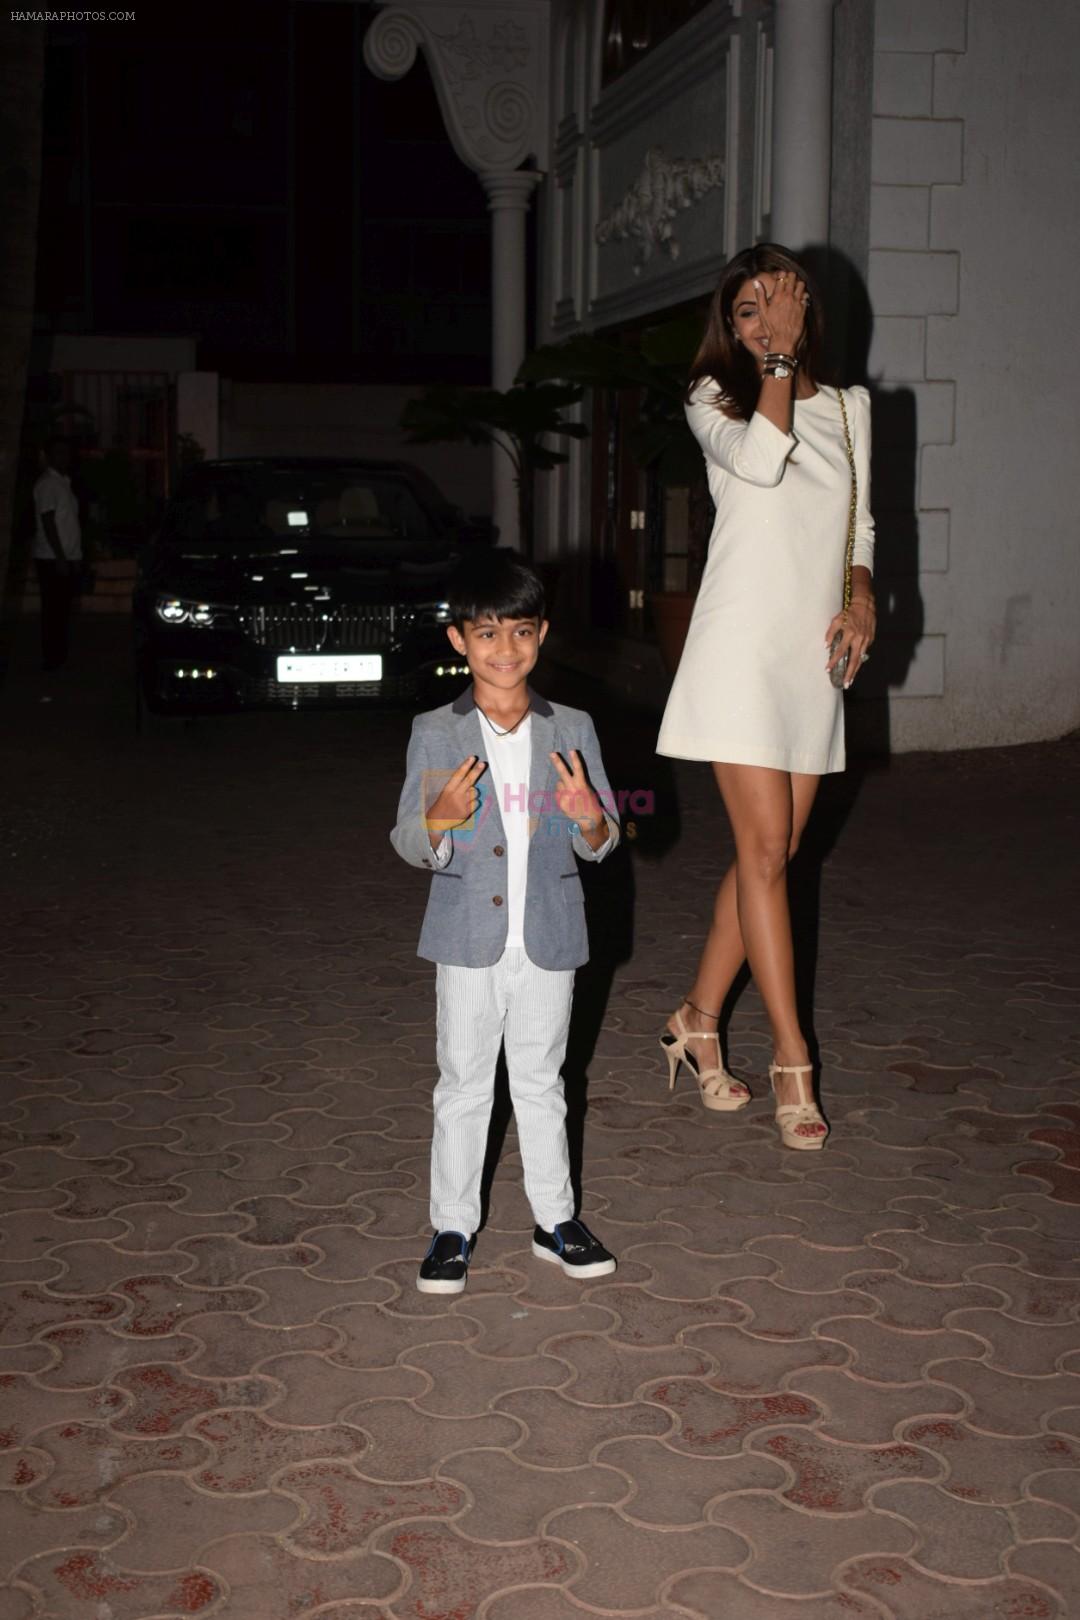 Shilpa Shetty, Raj Kundra & Viaan snapped as they go out for dinner on Viaan's birthday at juhu on 20th May 2018